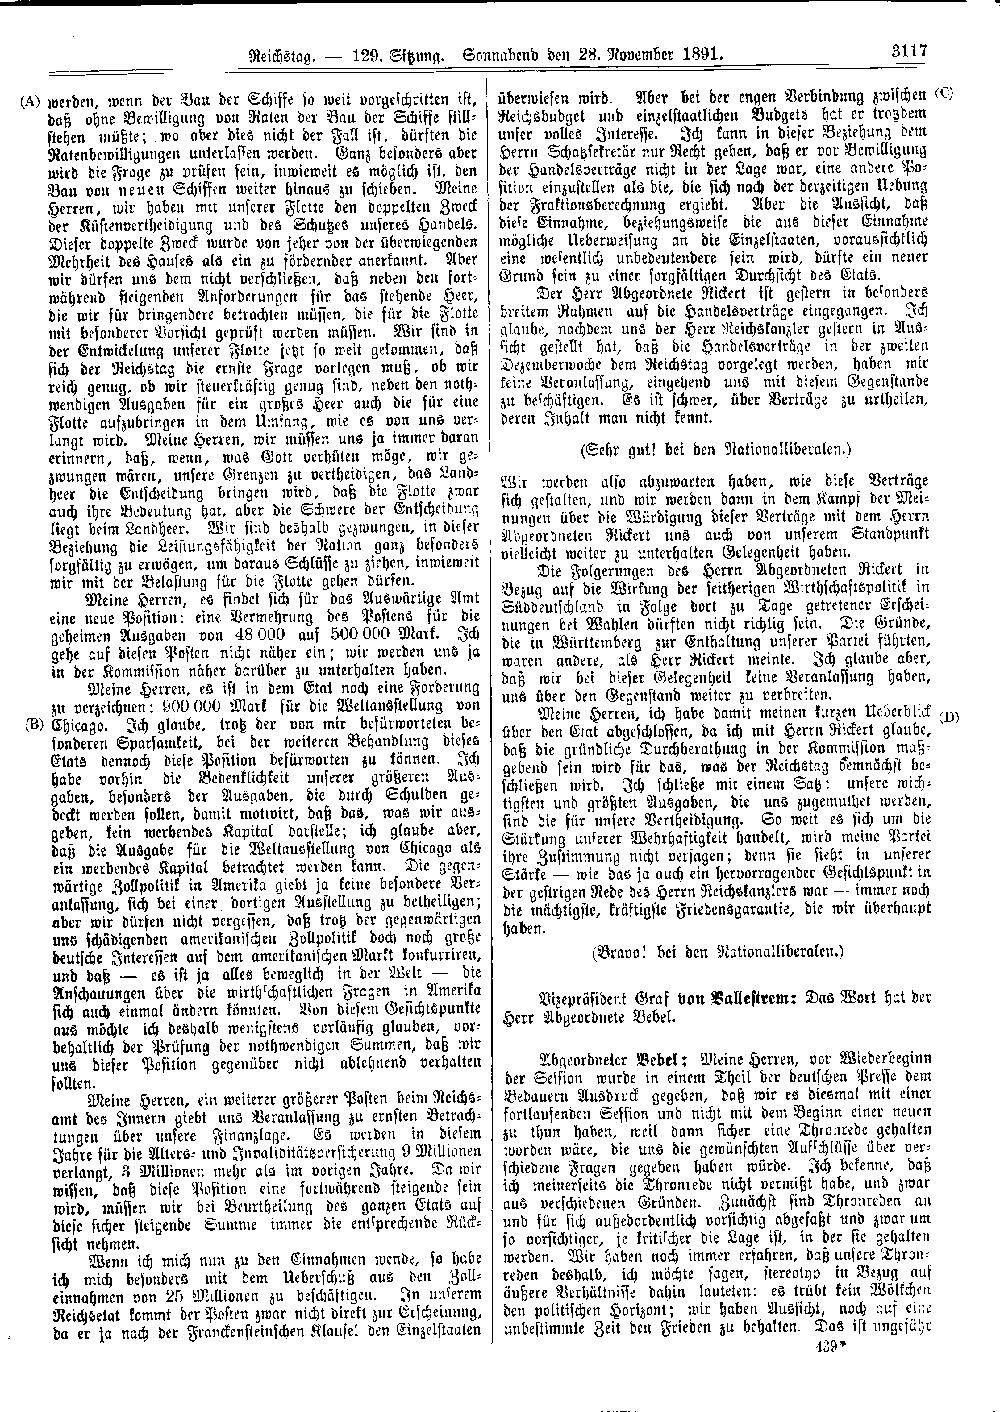 Scan of page 3117